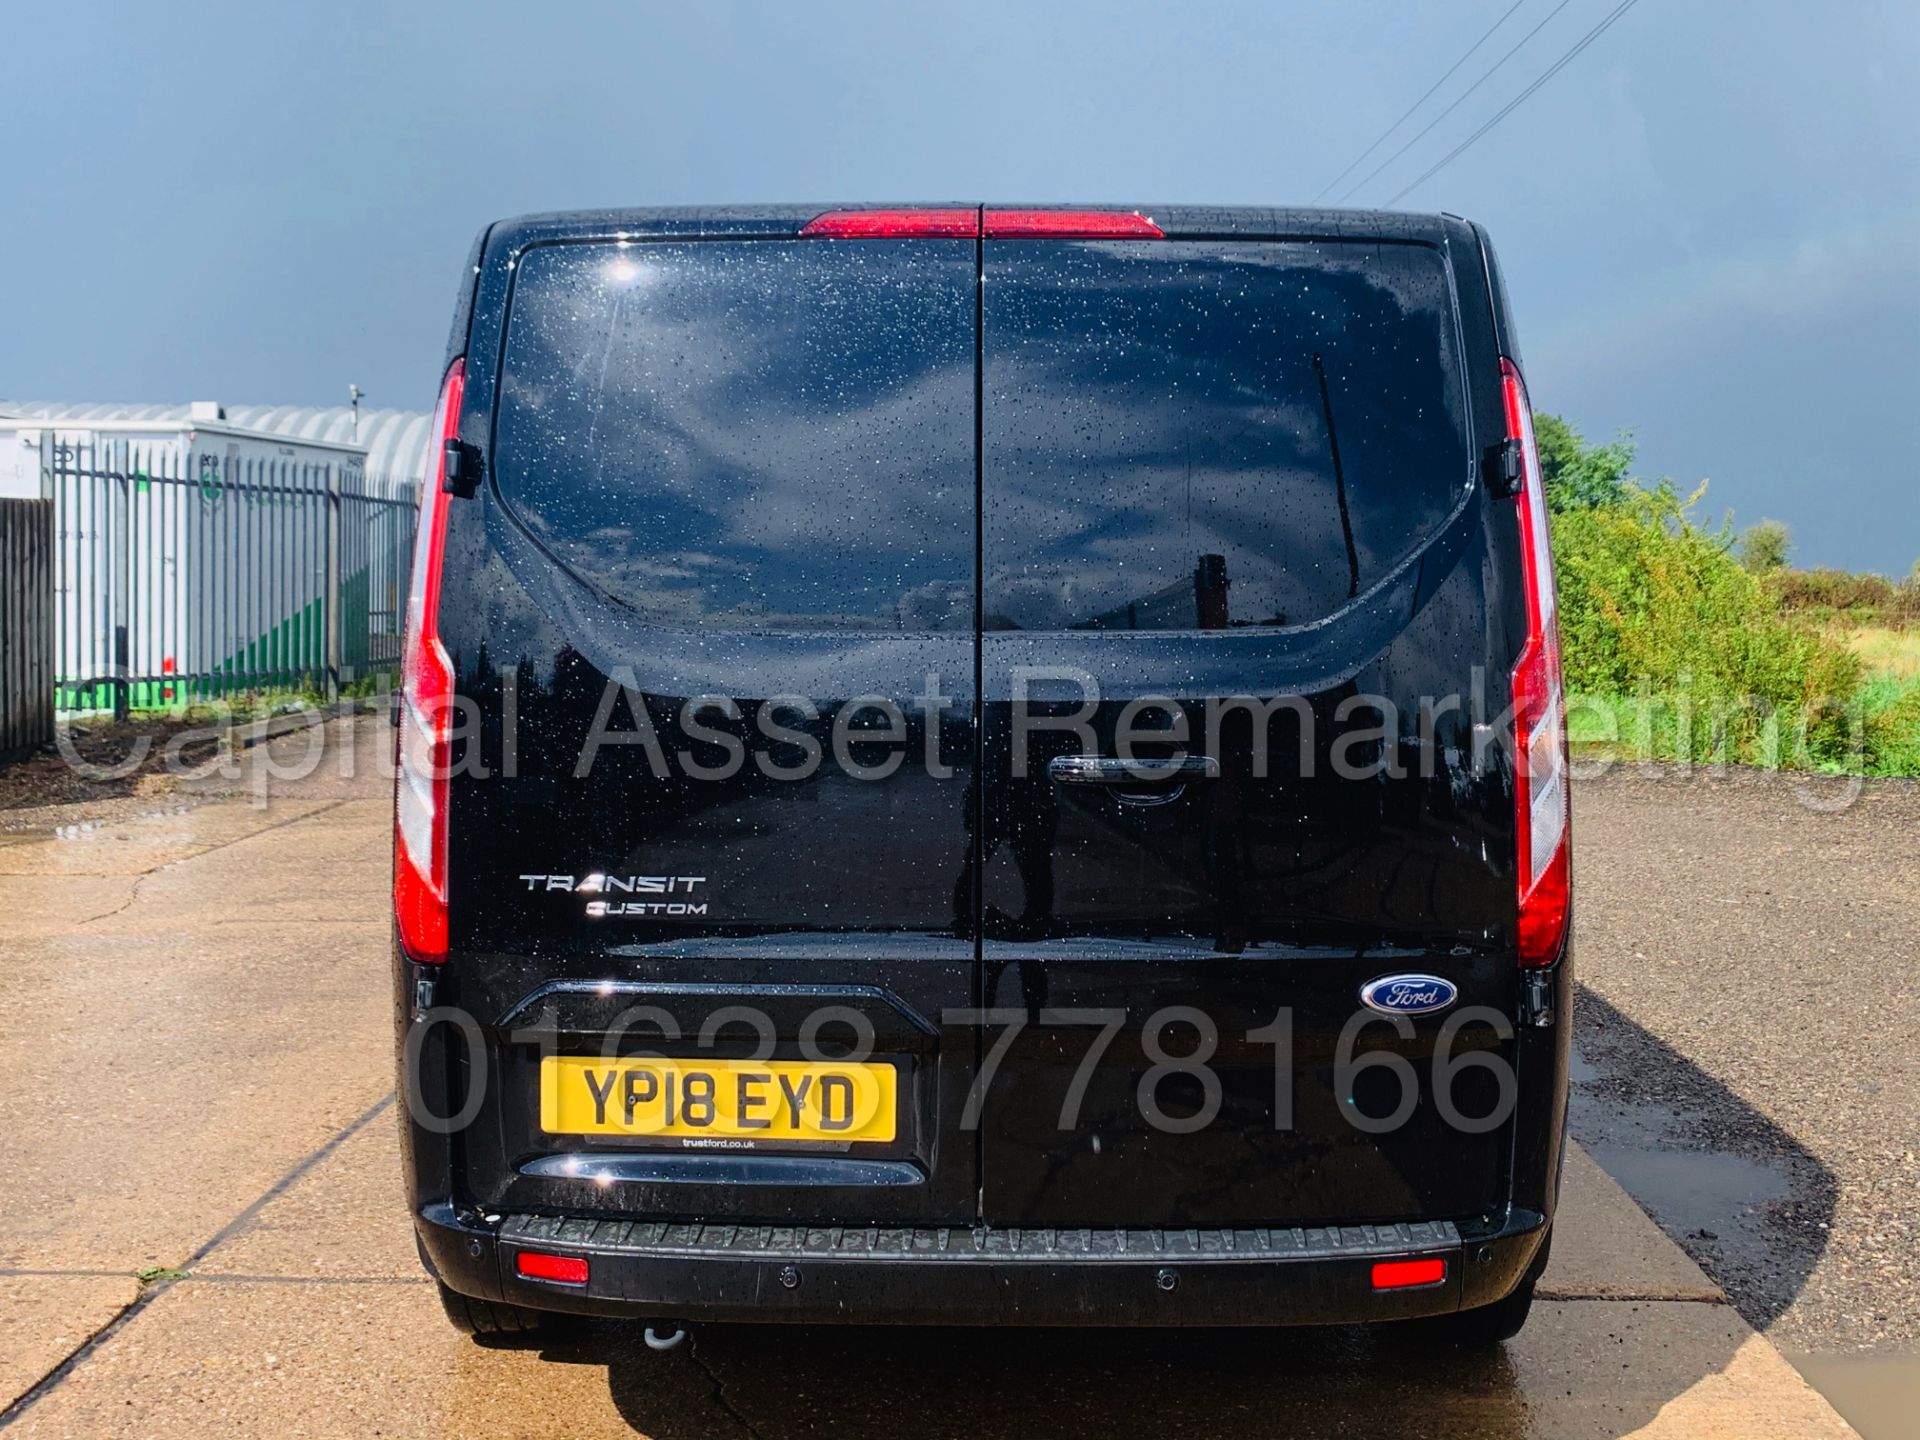 On Sale FORD TRANSIT CUSTOM *LIMITED* (2018 - EURO 6) '2.0 TDCI - 130 BHP - 6 SPEED' **LOW MILES** - Image 11 of 44